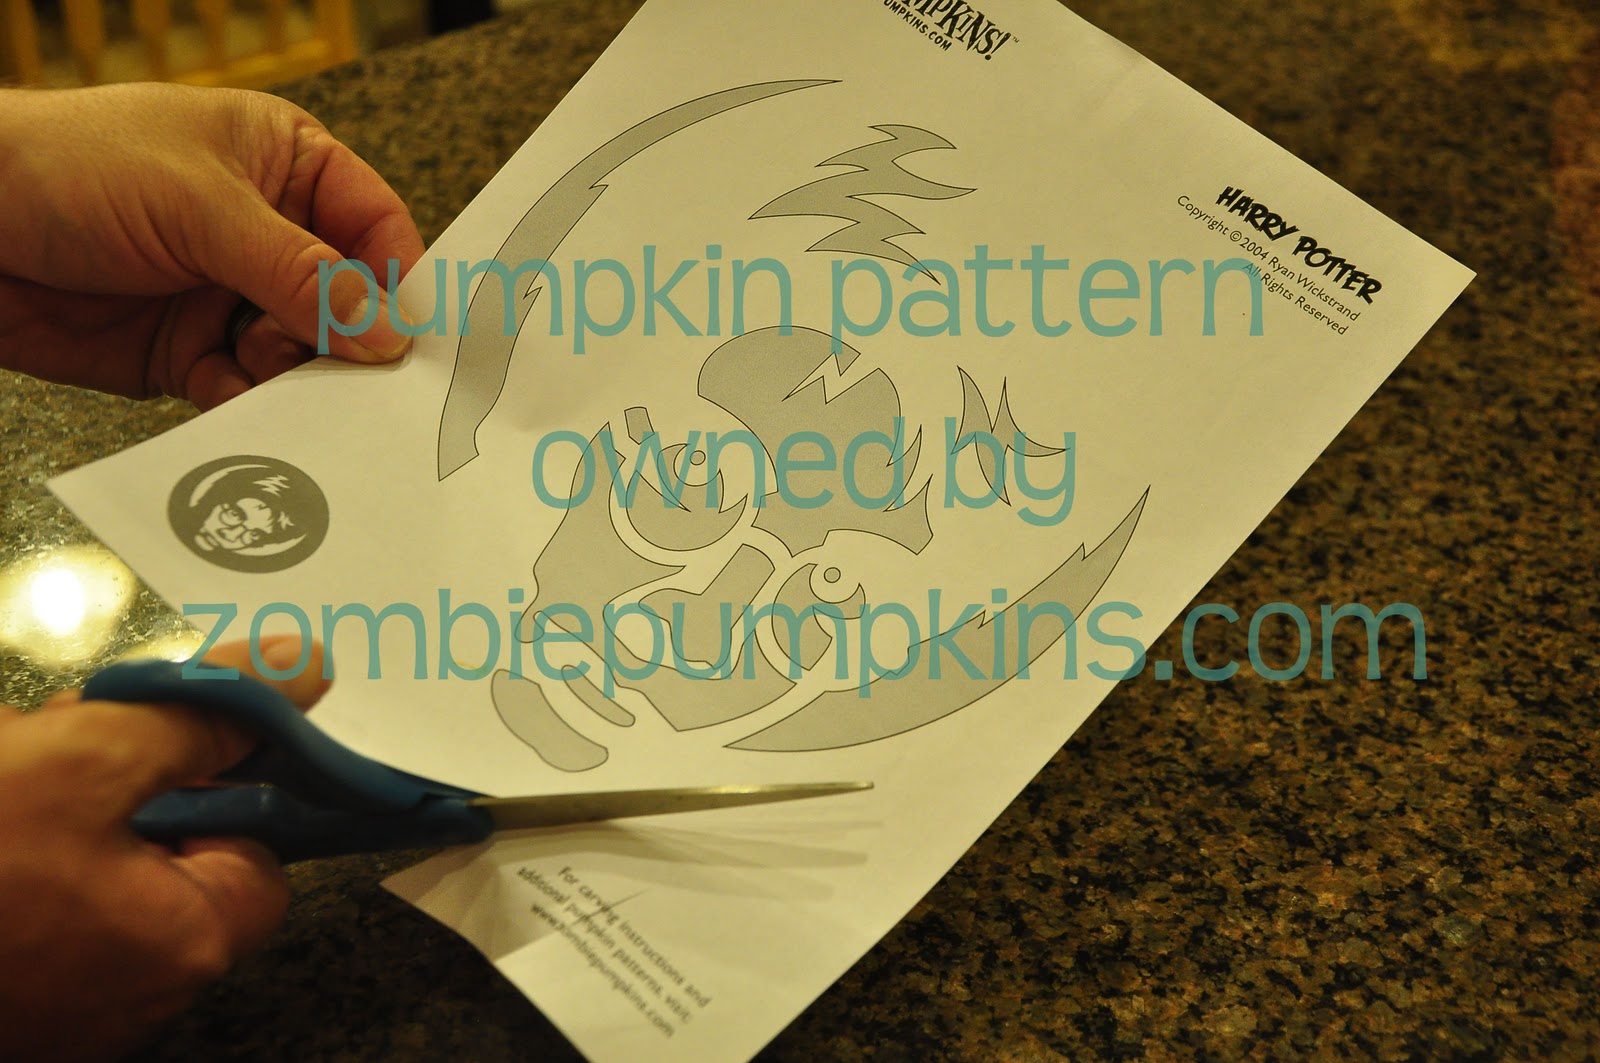 Free Pumpkin Carving Patterns and Stencils